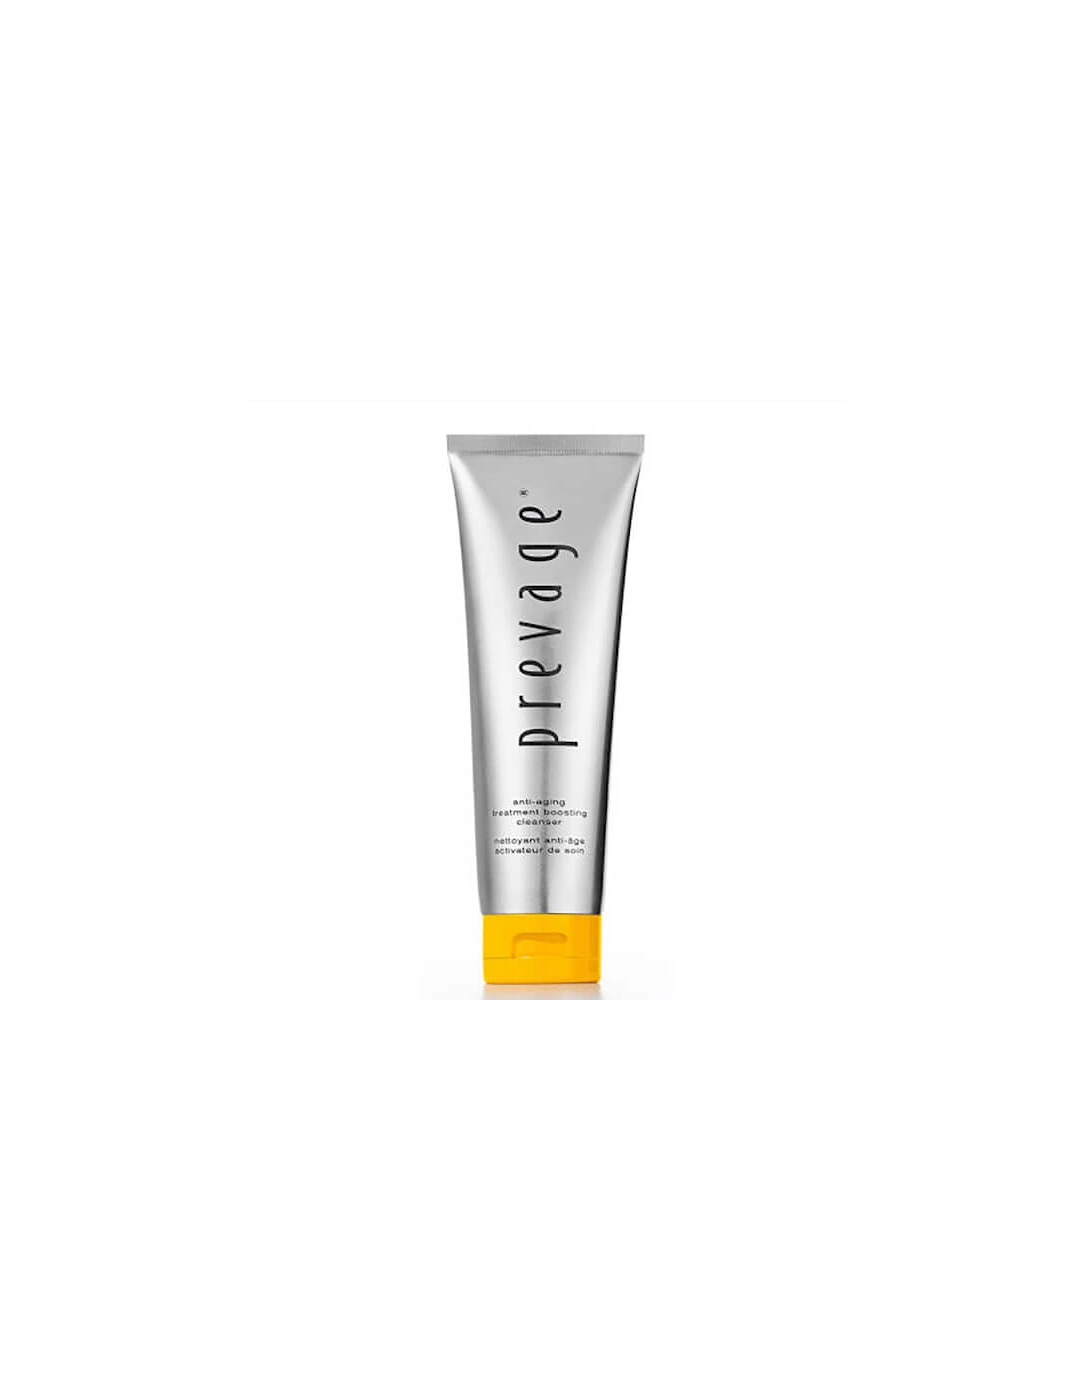 Prevage Anti-ageing Treatment Boosting Cleanser - Elizabeth Arden, 2 of 1